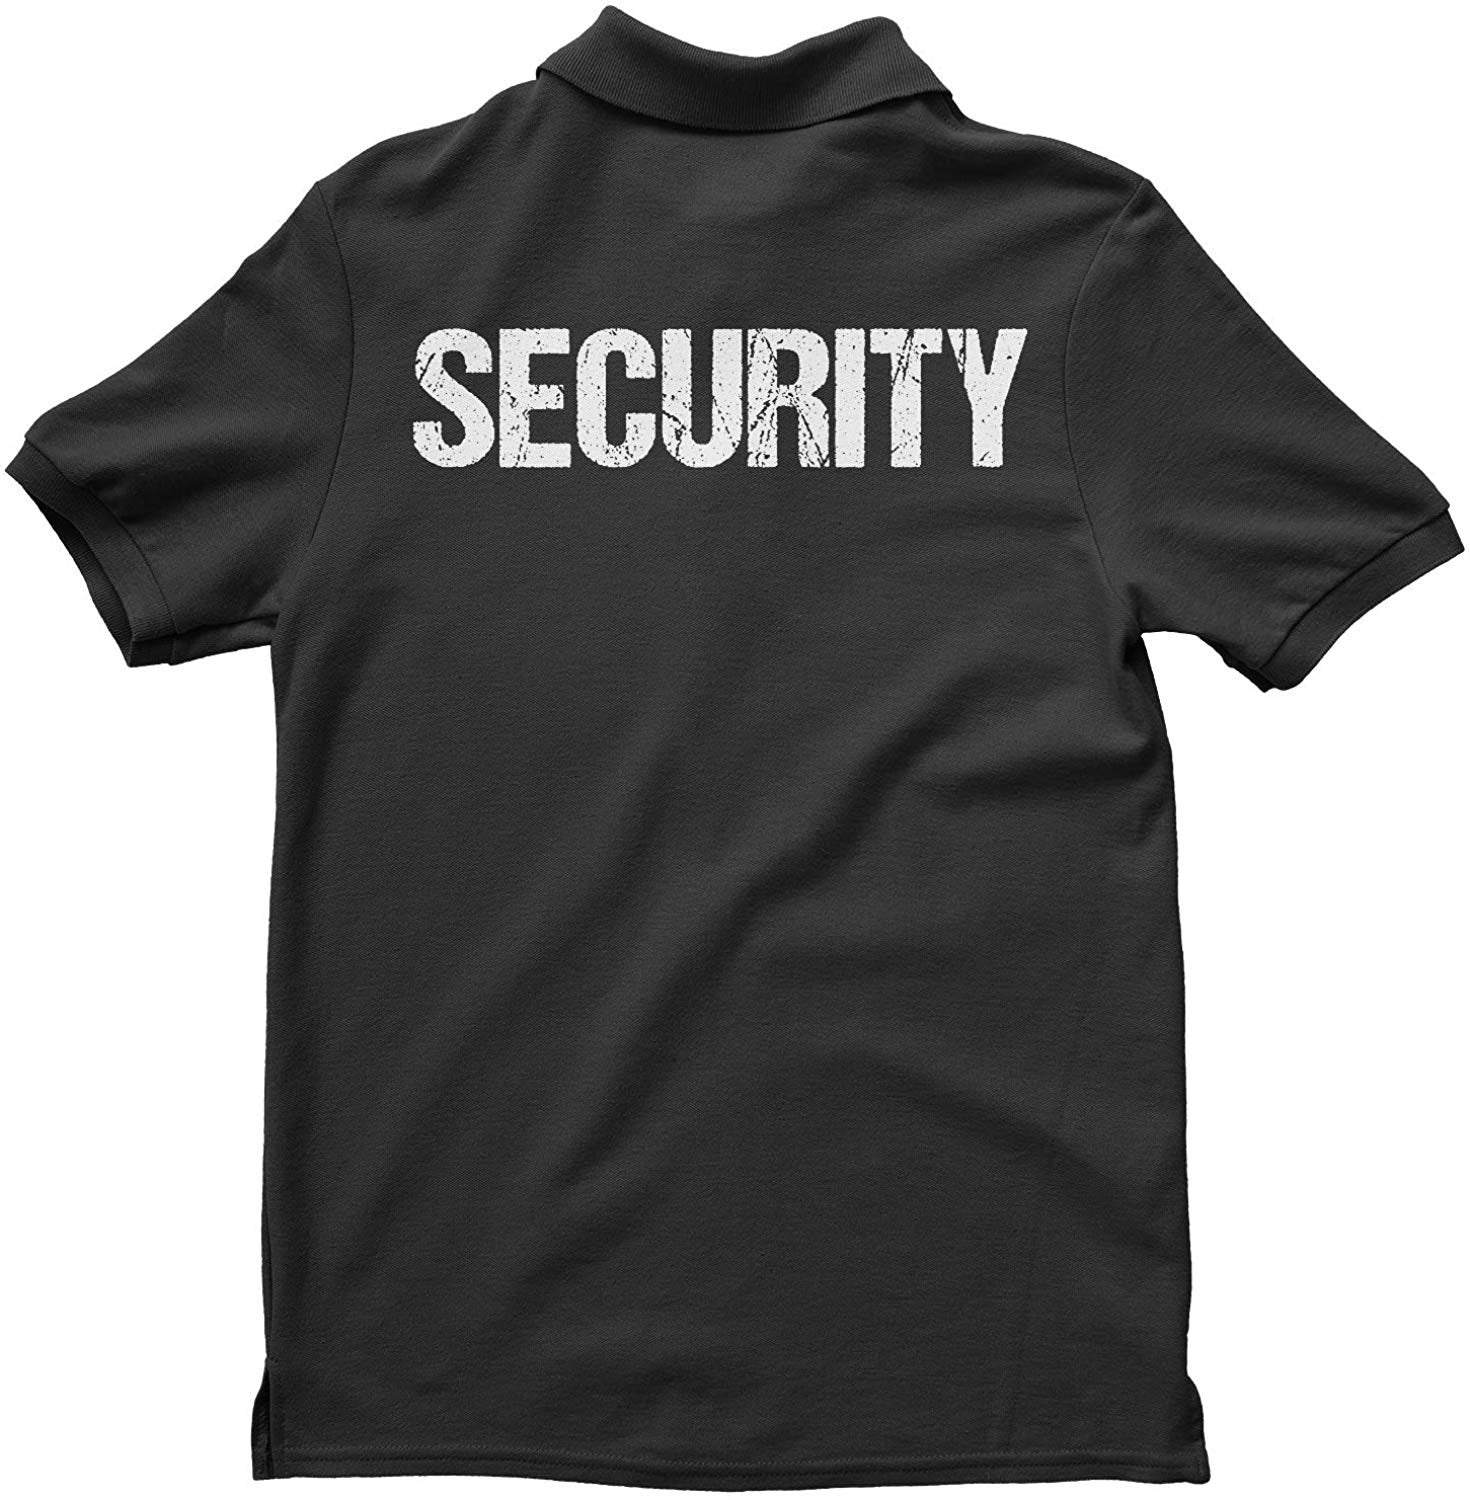 Security Polo Shirt Front & Back Print (Distressed, Black & White)